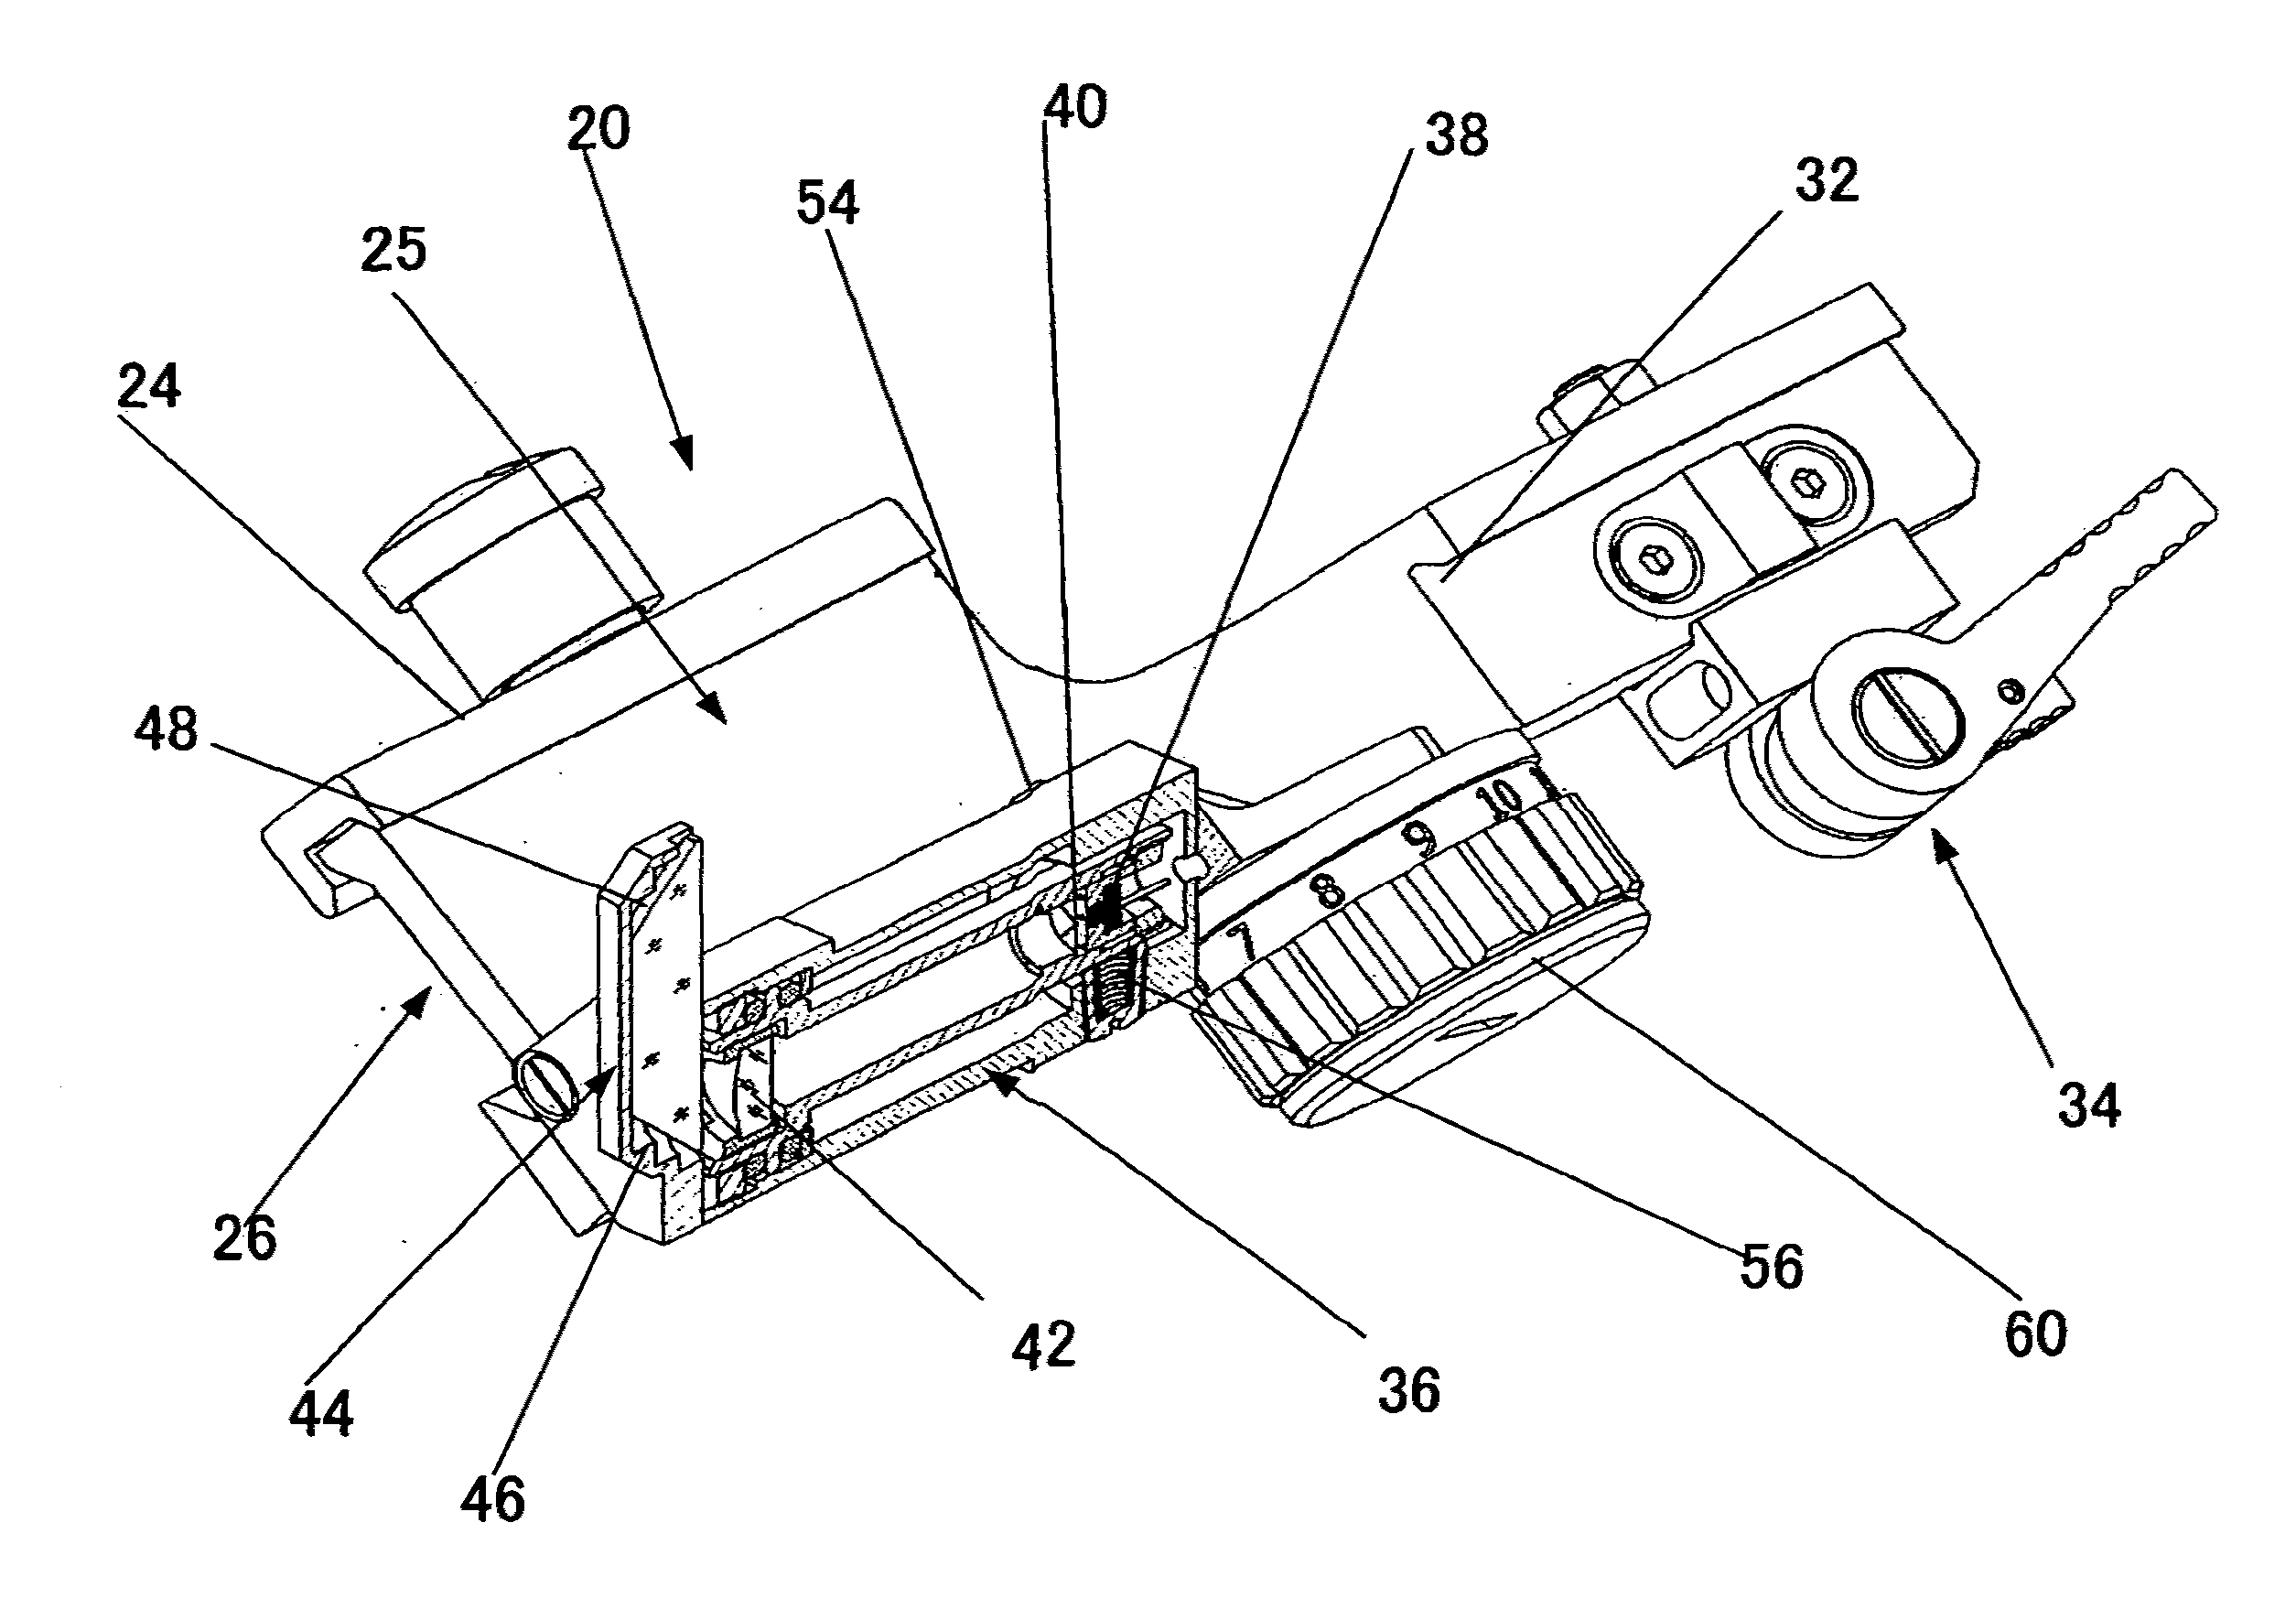 Universal mounting bracket with optical functions for use with auxiliary optical devices